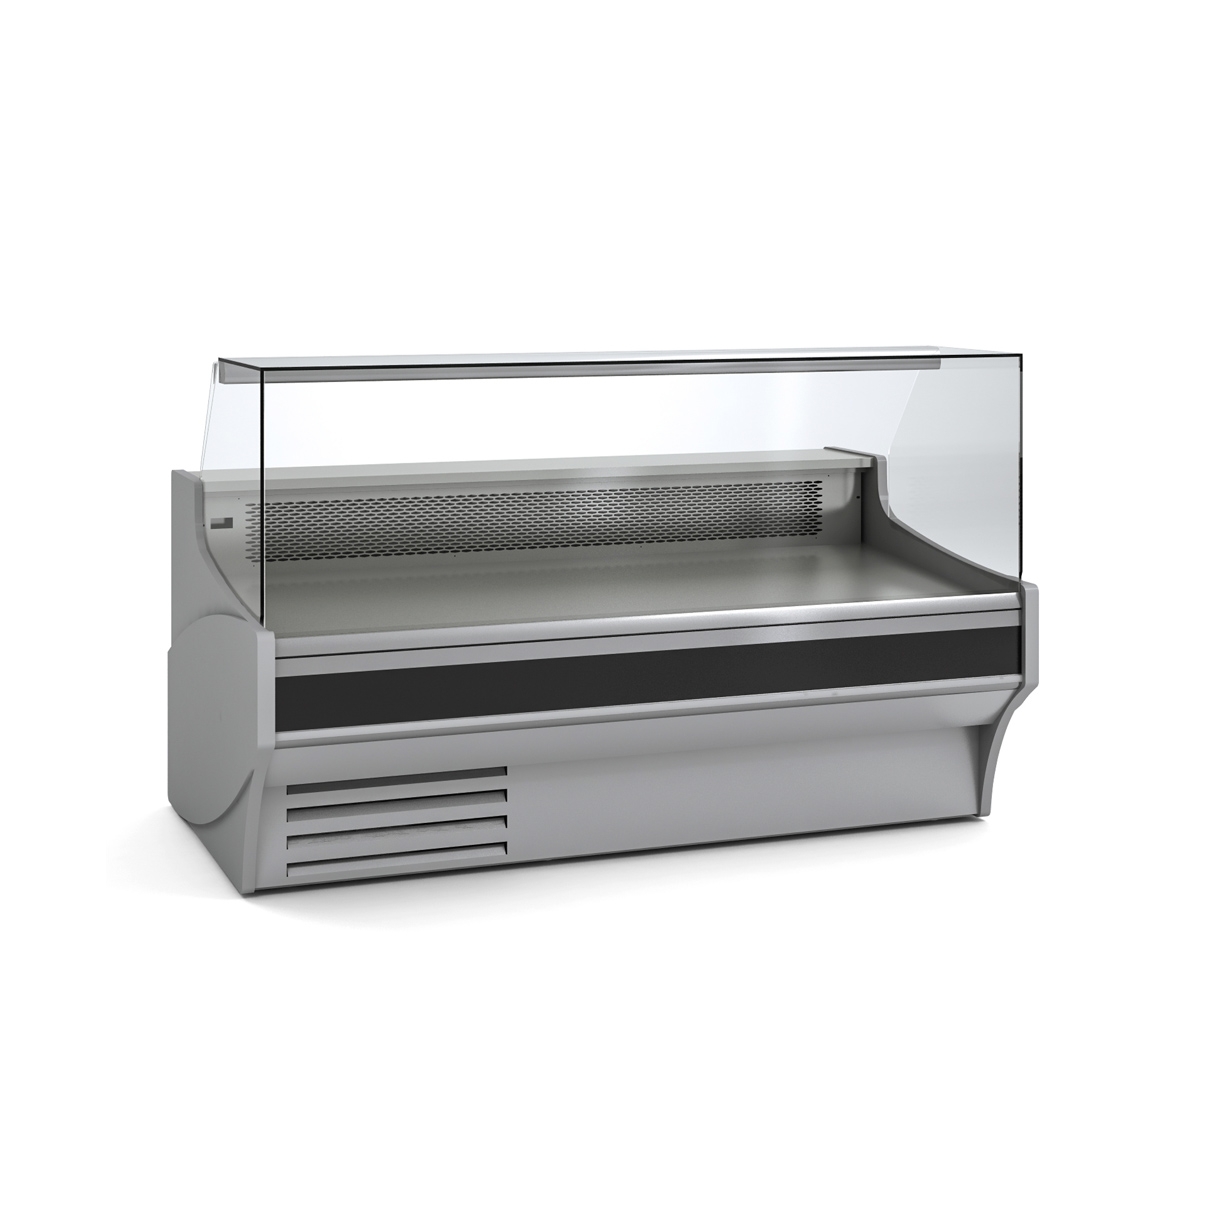 Modular Refrigerated Display Case VE-10-RR-TF